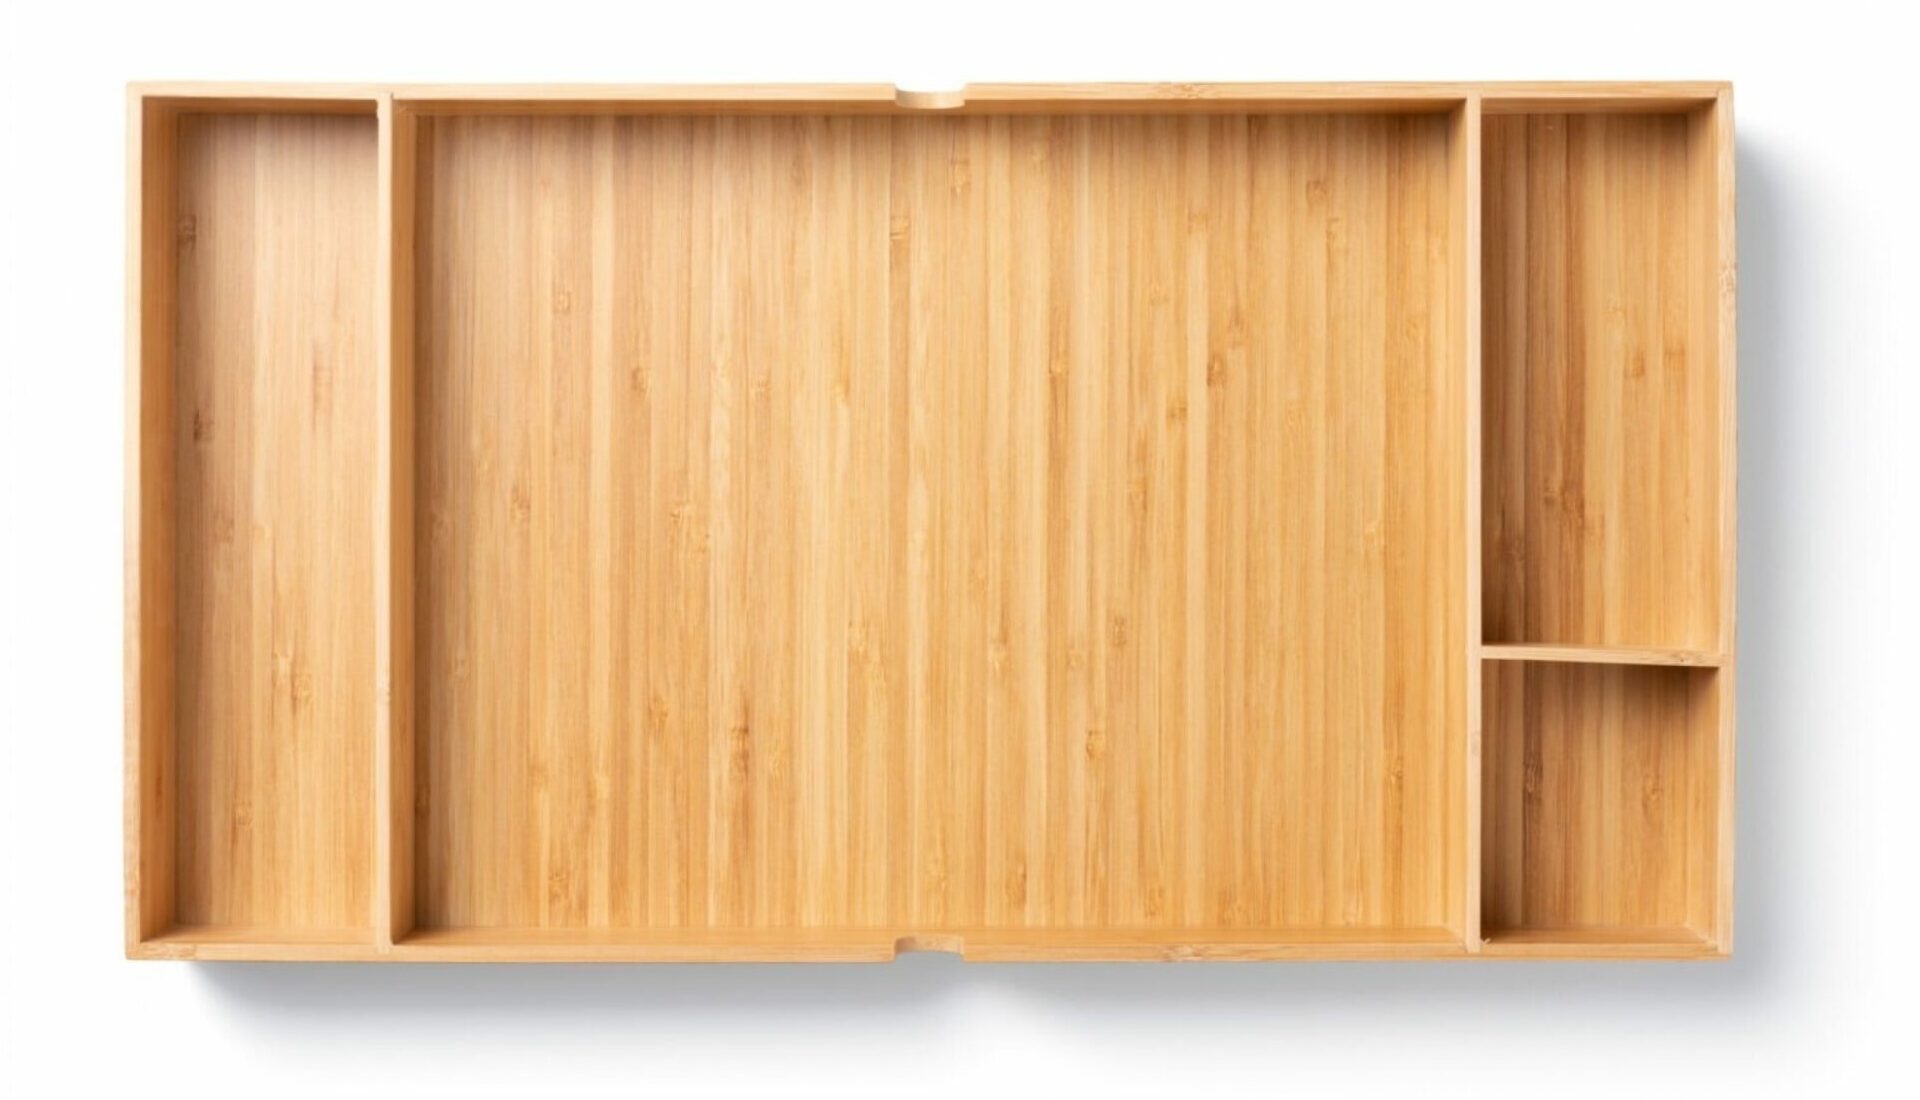 Desktop Organizer Drawer Tray With Separated Areas